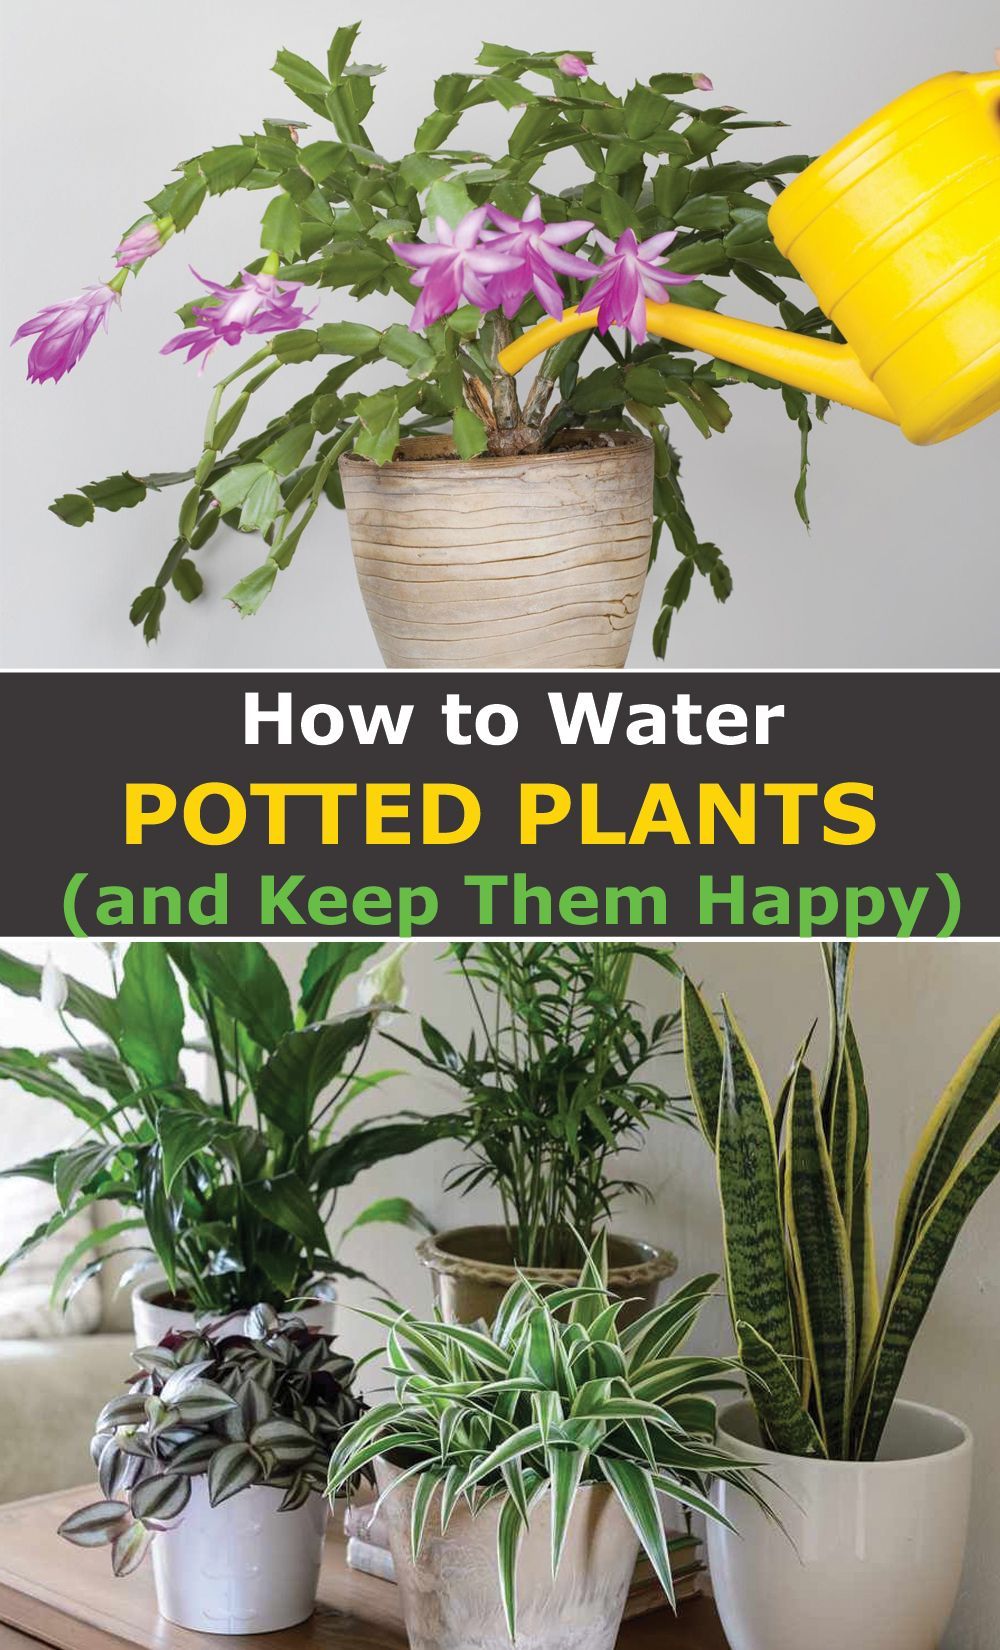 How to Water Potted Plants and Keep them Happy -   15 plants Beautiful simple ideas